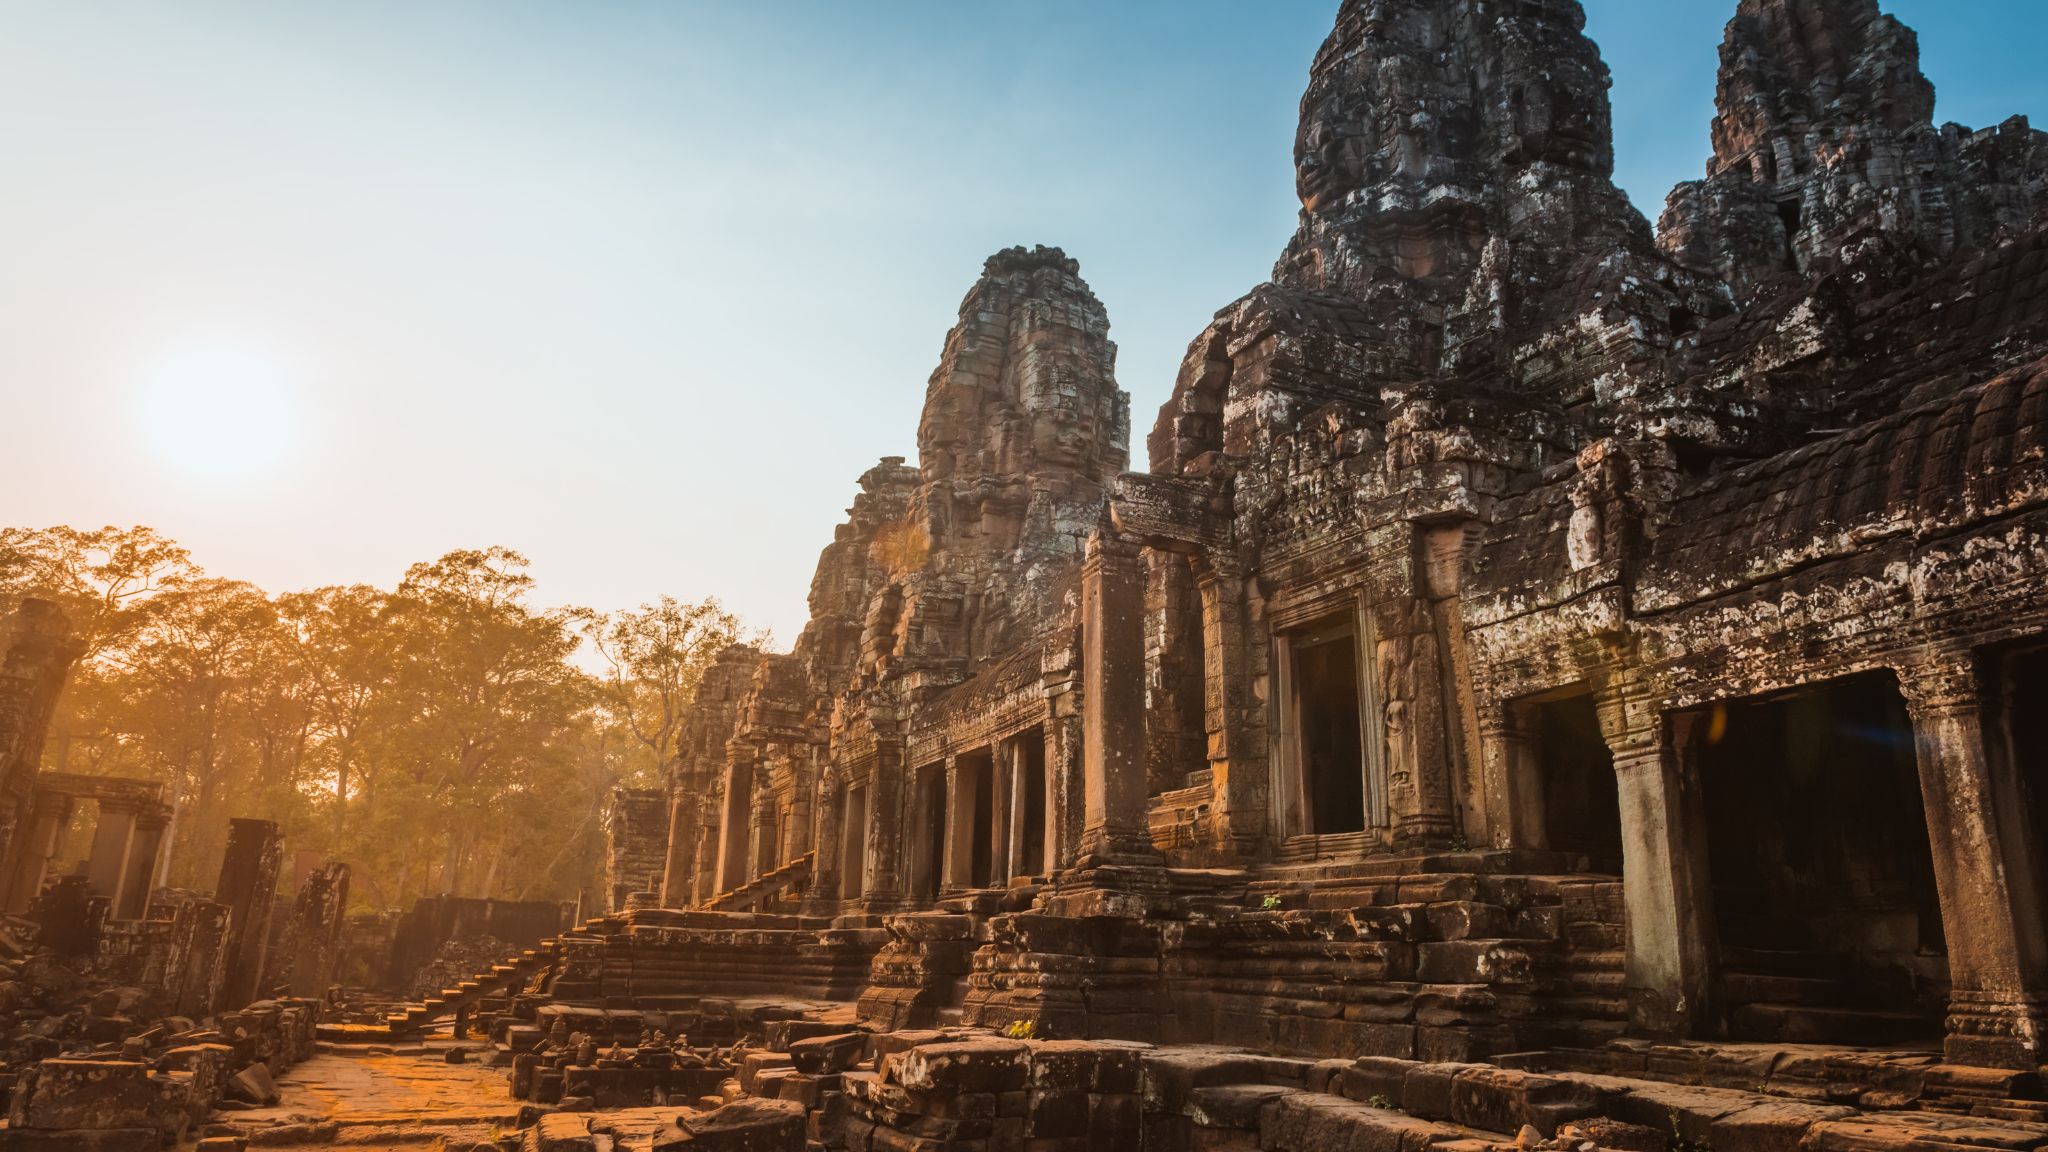 Day 26 Gaze In Awe At The Famous And Impressive Colossal Human Faces Carved In Stone At Bayon Temple